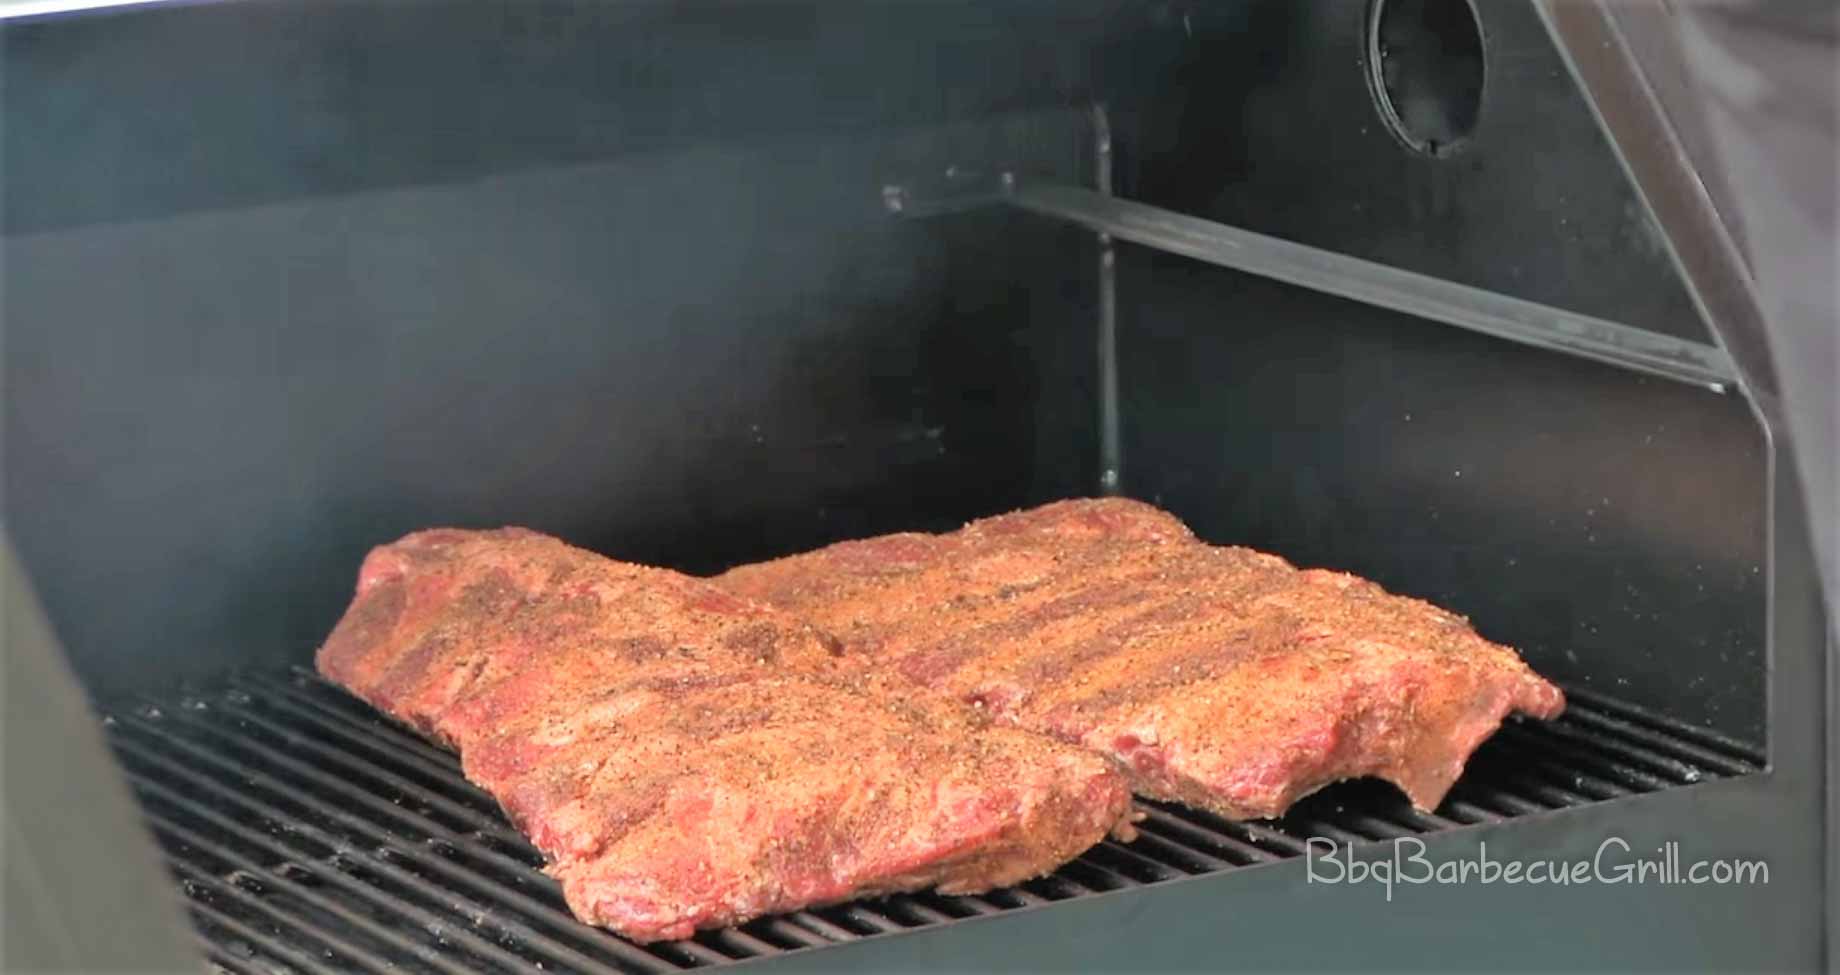 Best Smoking Meat Books For Bbq Lovers In 2020 Bbq Grill,10th Anniversary Ideas